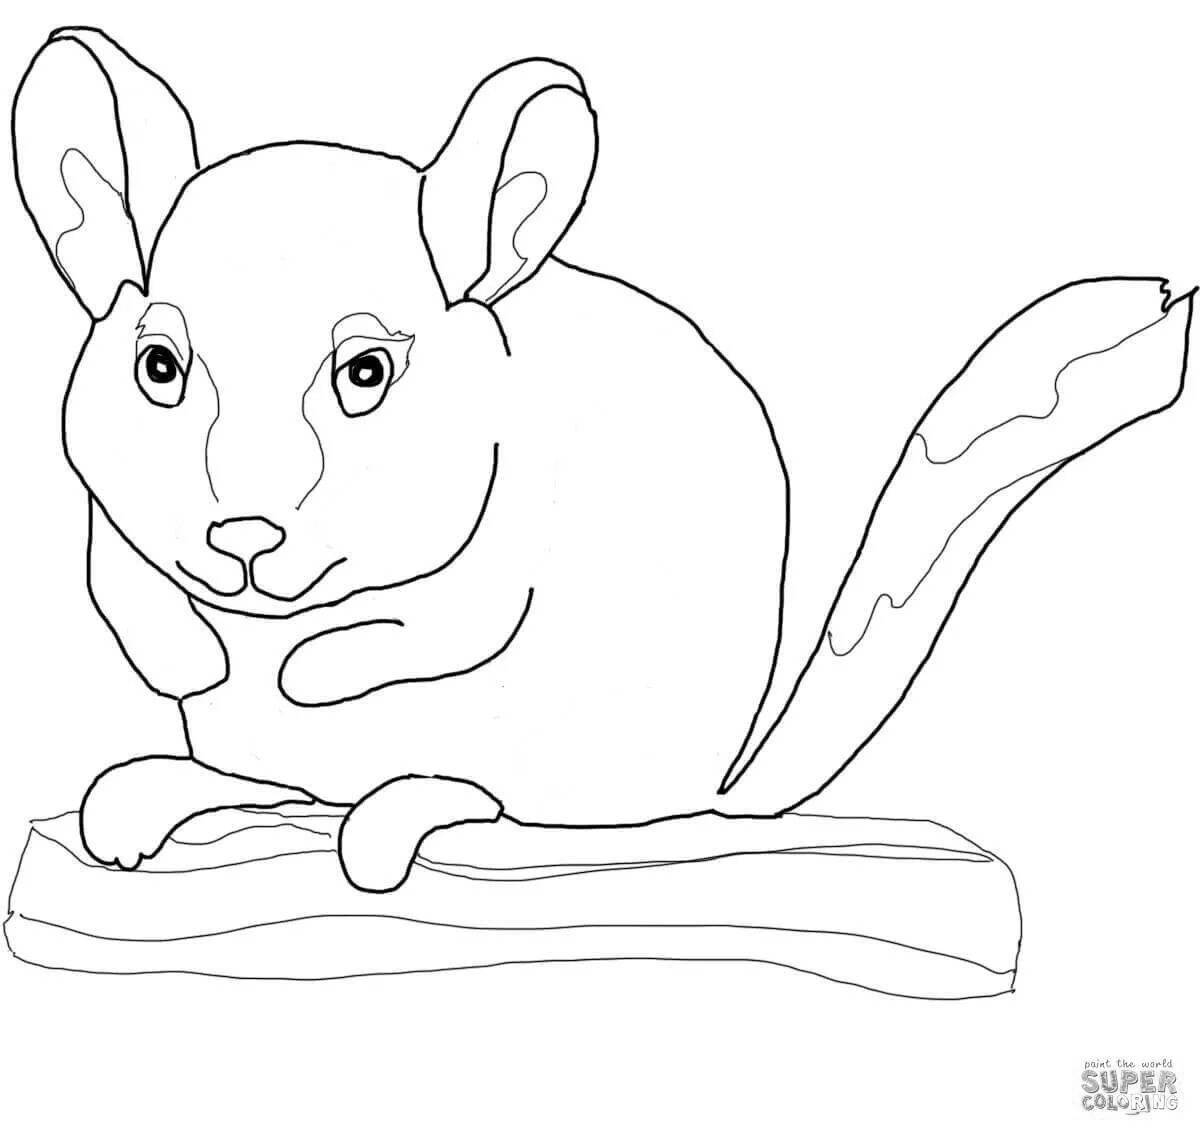 Great chinchilla coloring book for kids